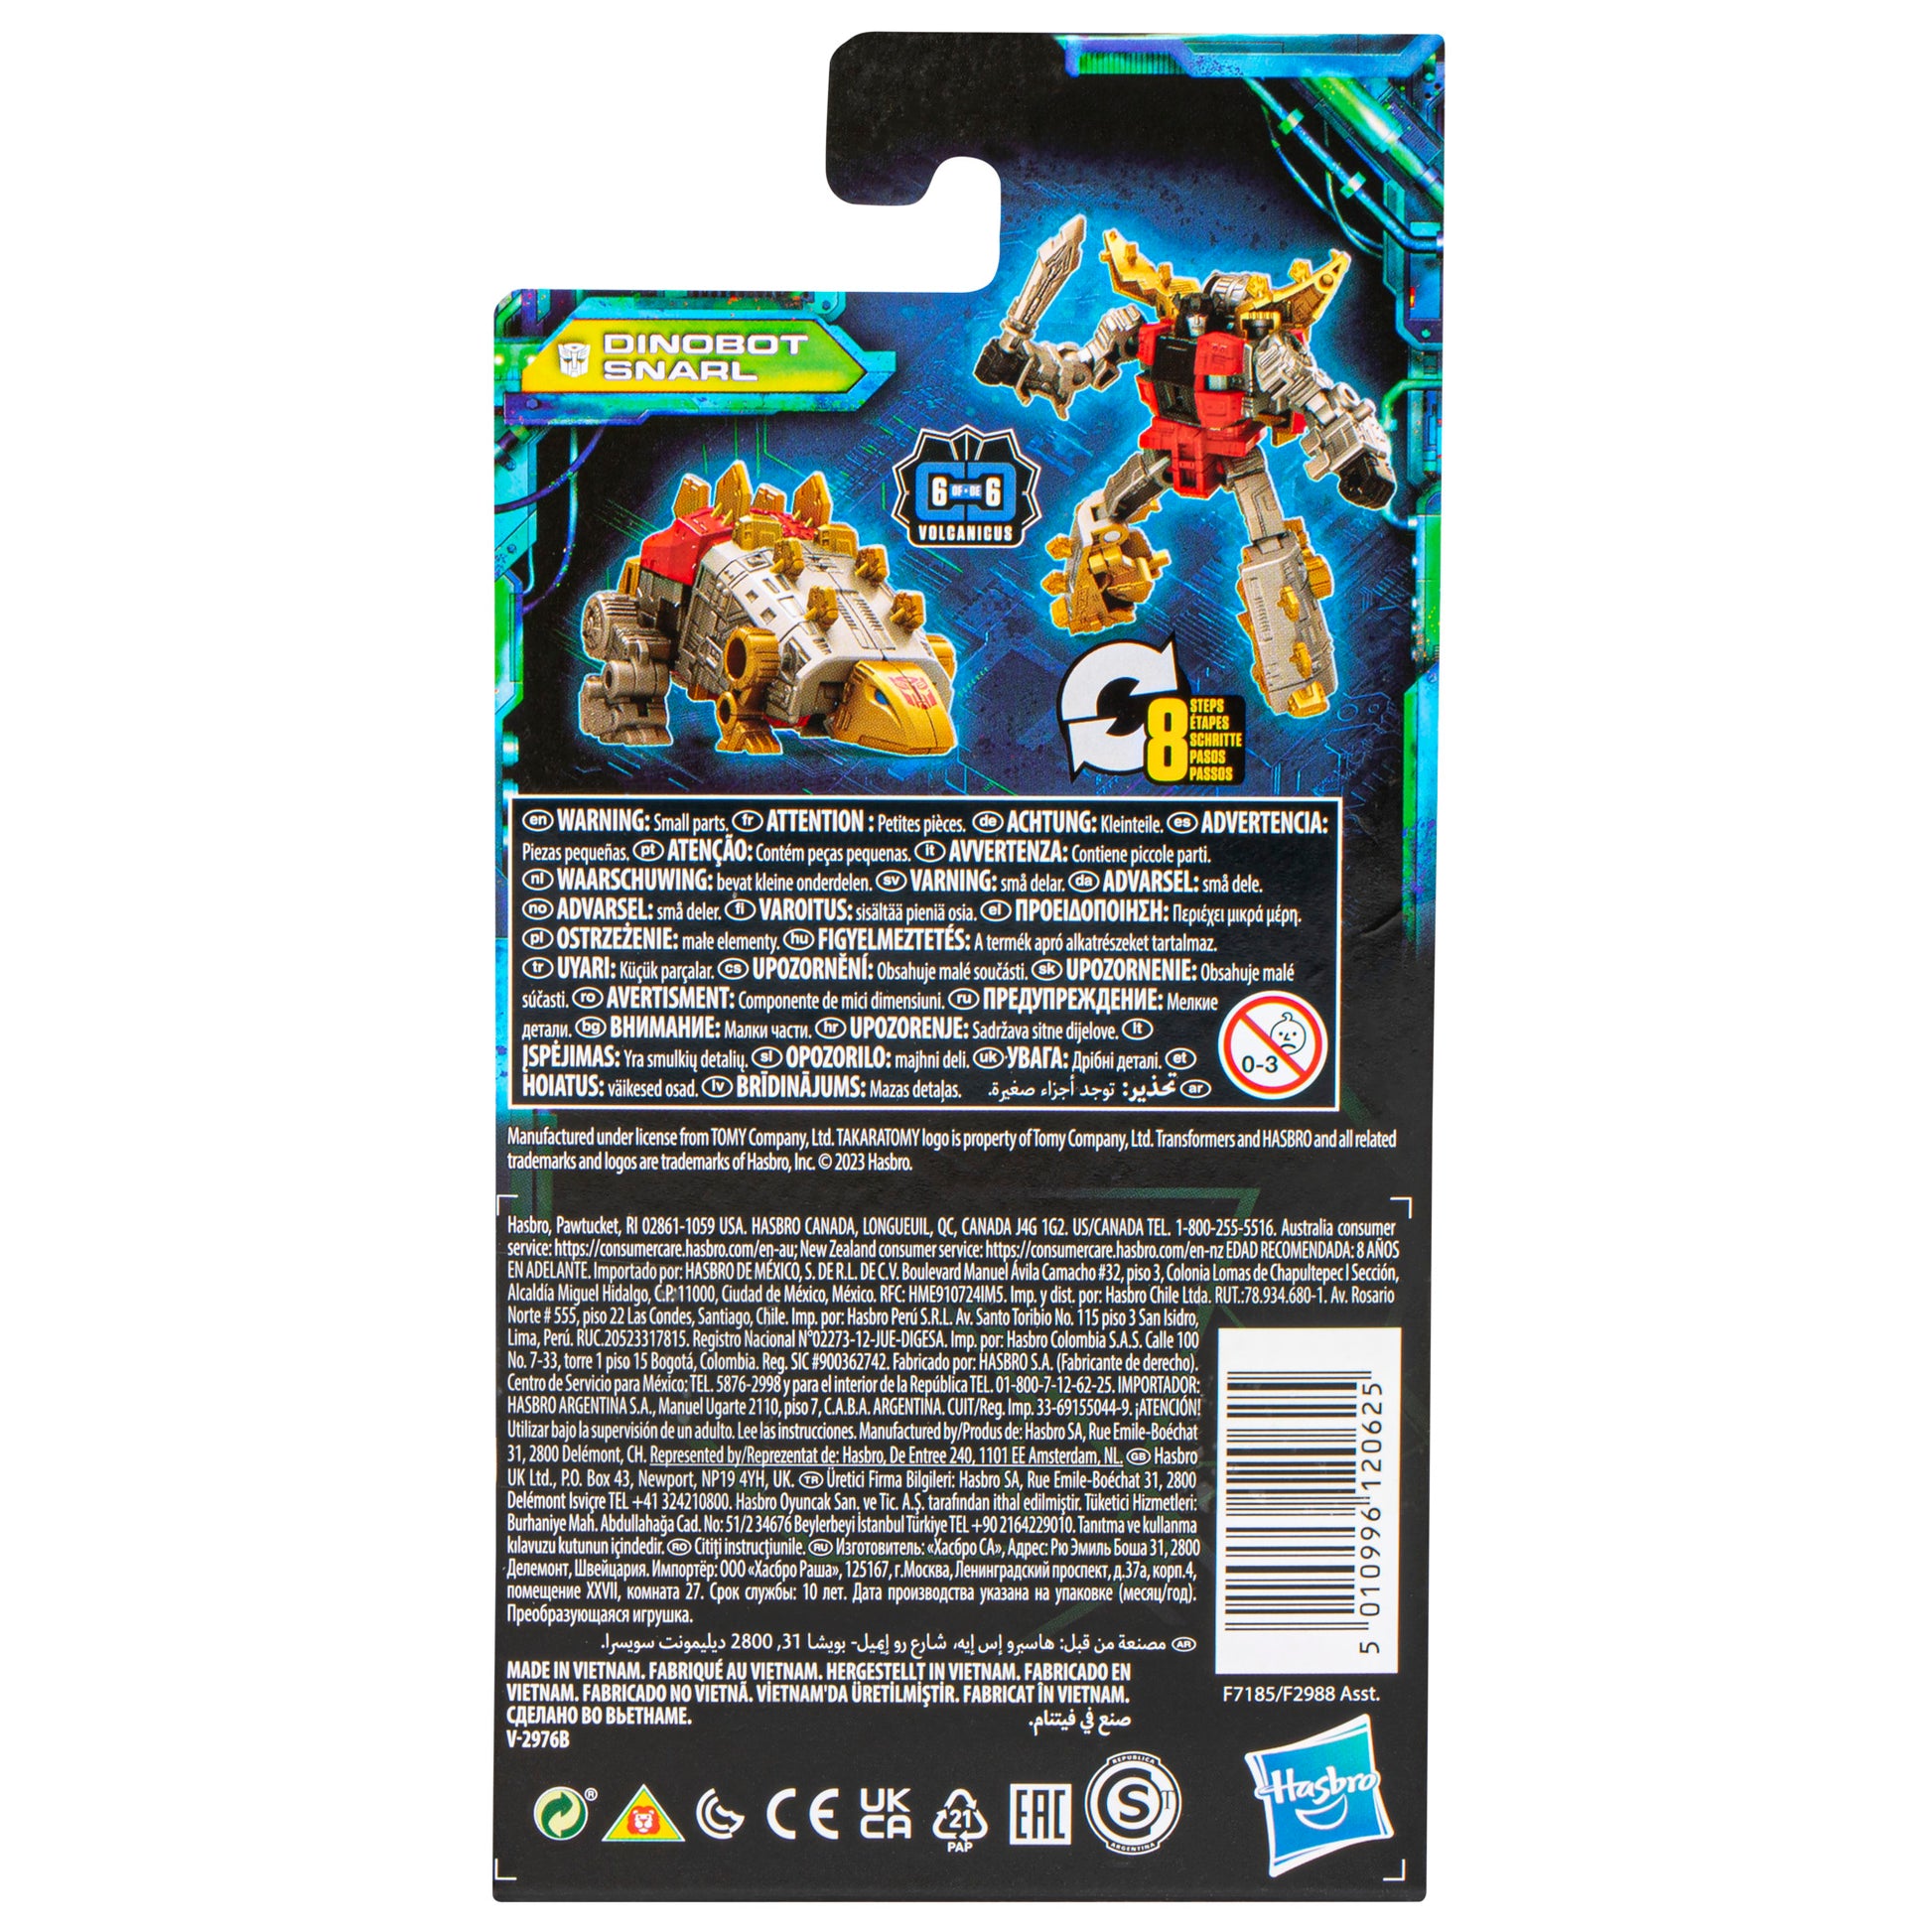 Transformers Legacy Evolution Core Class Dinobot Snarl back view of the package - Heretoserveyou